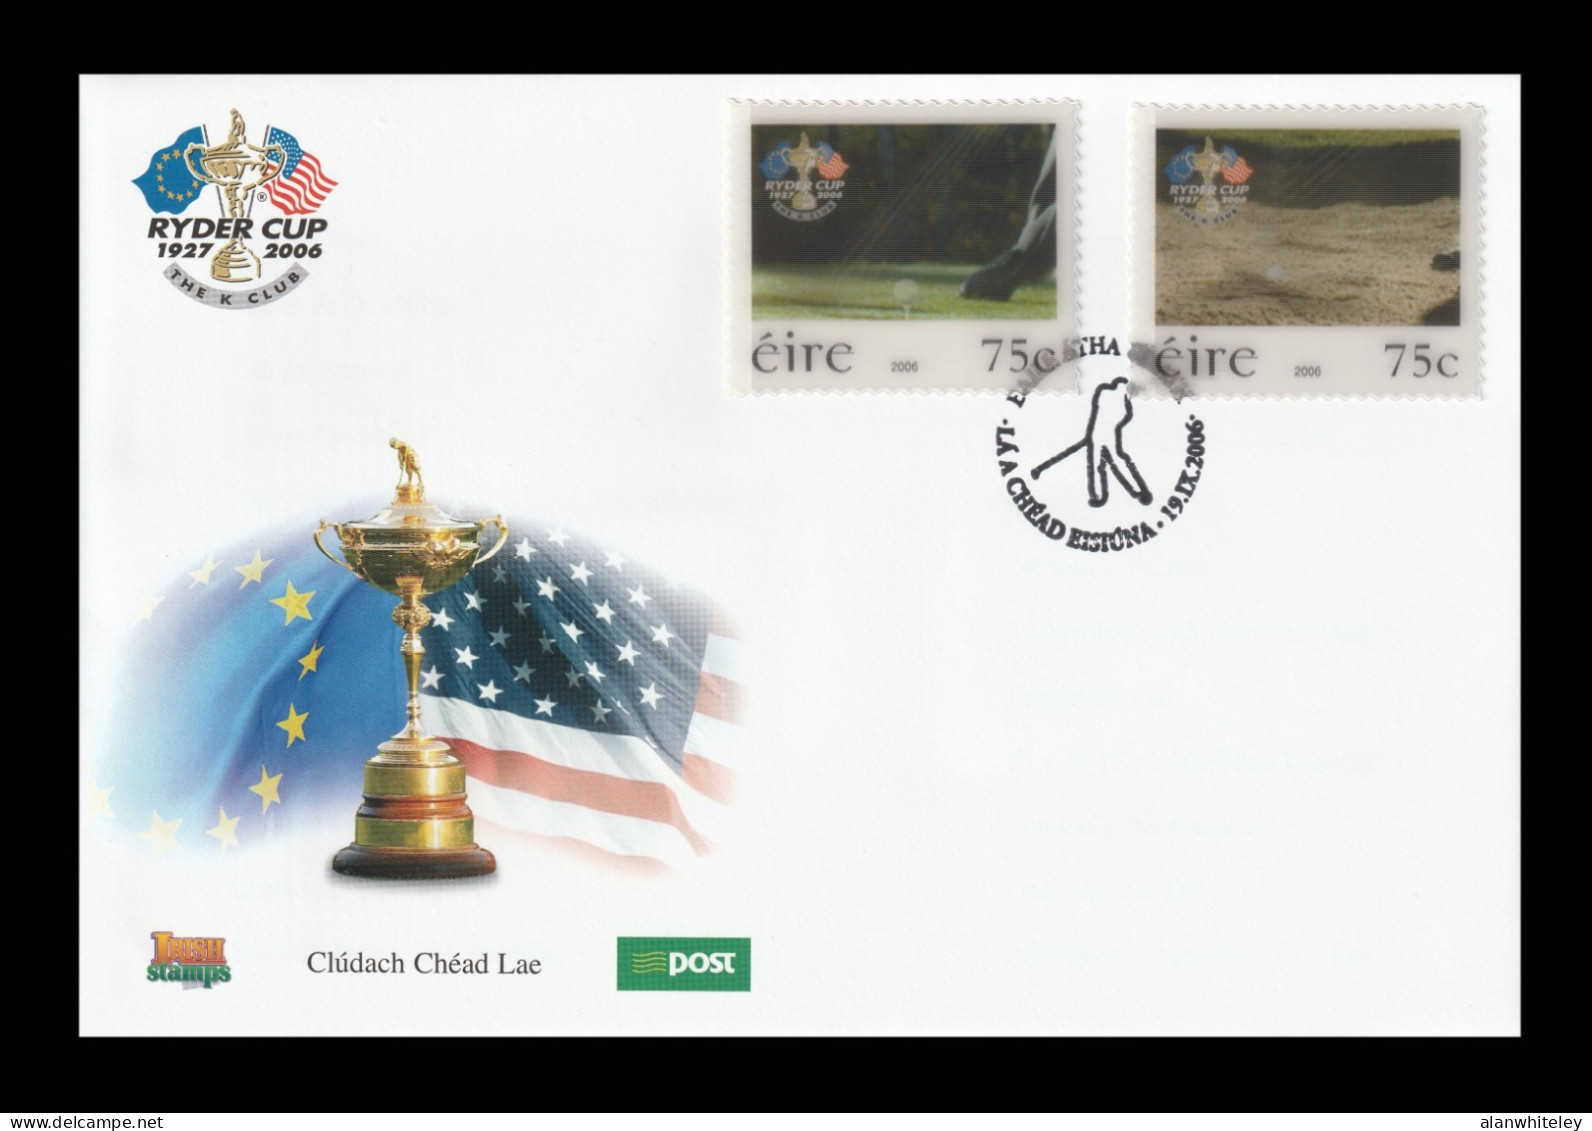 IRELAND 2006 Ryder Cup Golf Tournament: First Day Cover CANCELLED - FDC